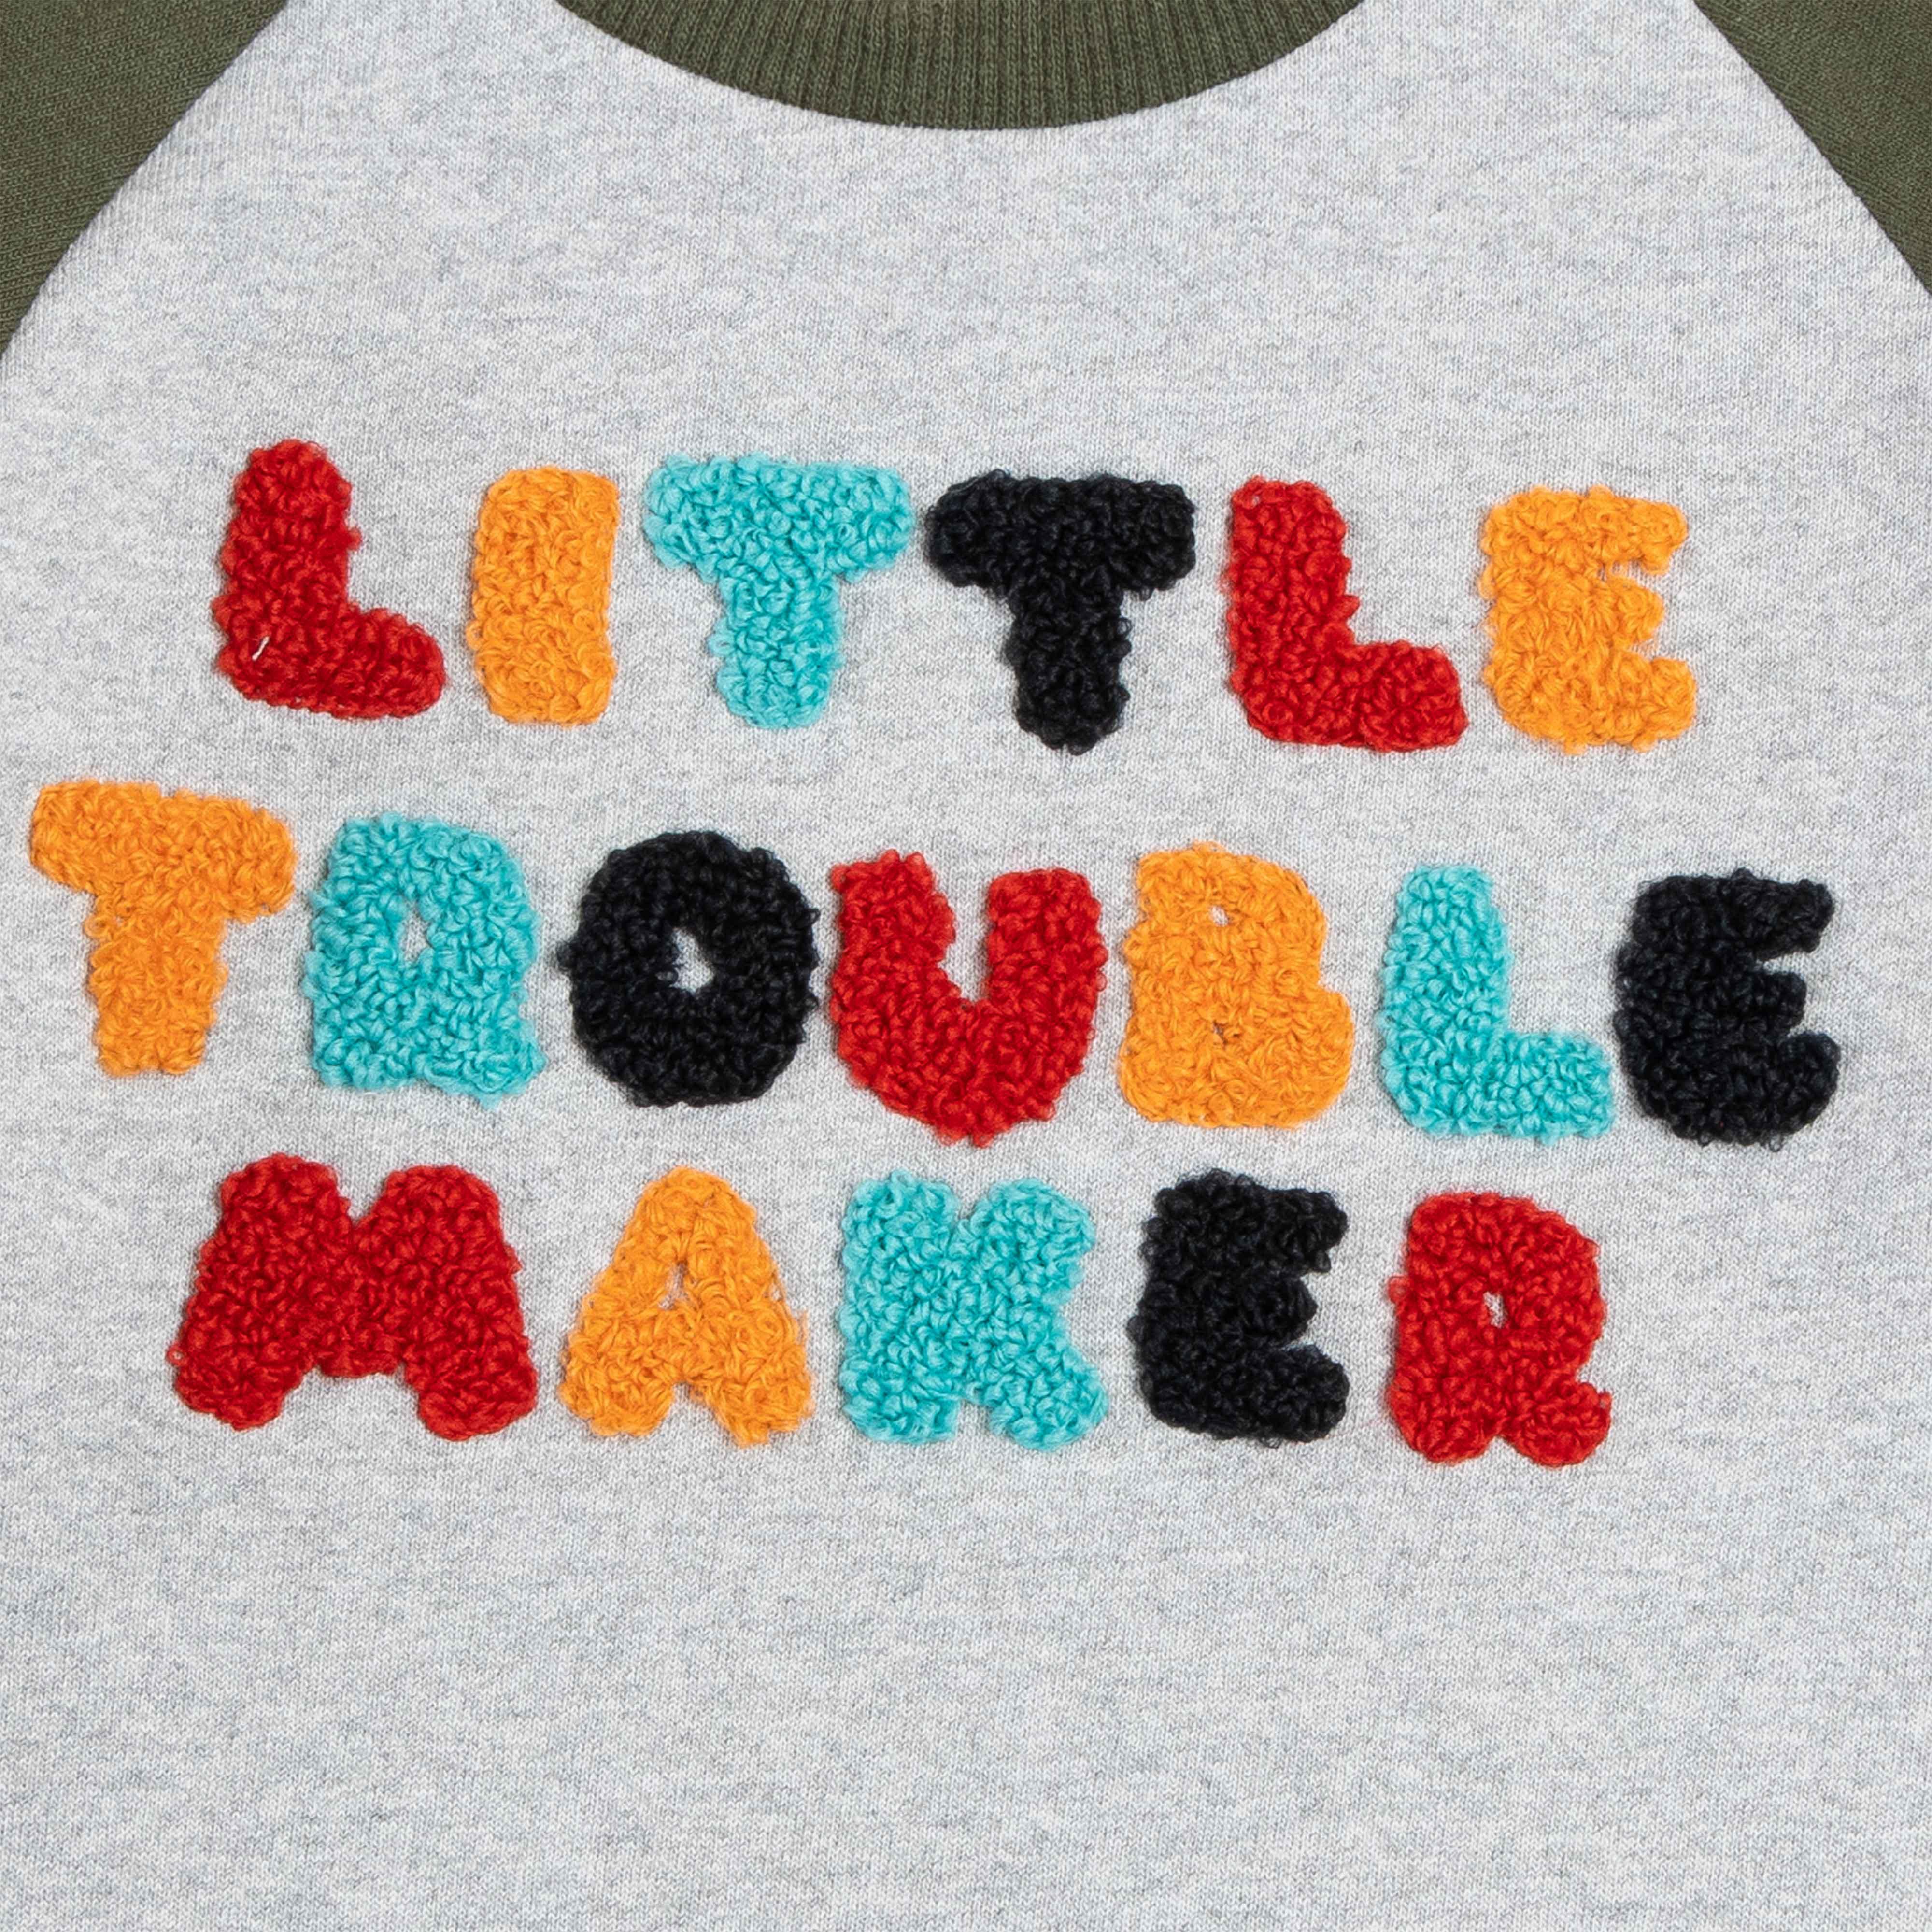 Young Boys Full Sleeve Little Trouble Maker Embroidery T Shirt With Jogger Pant - Juscubs